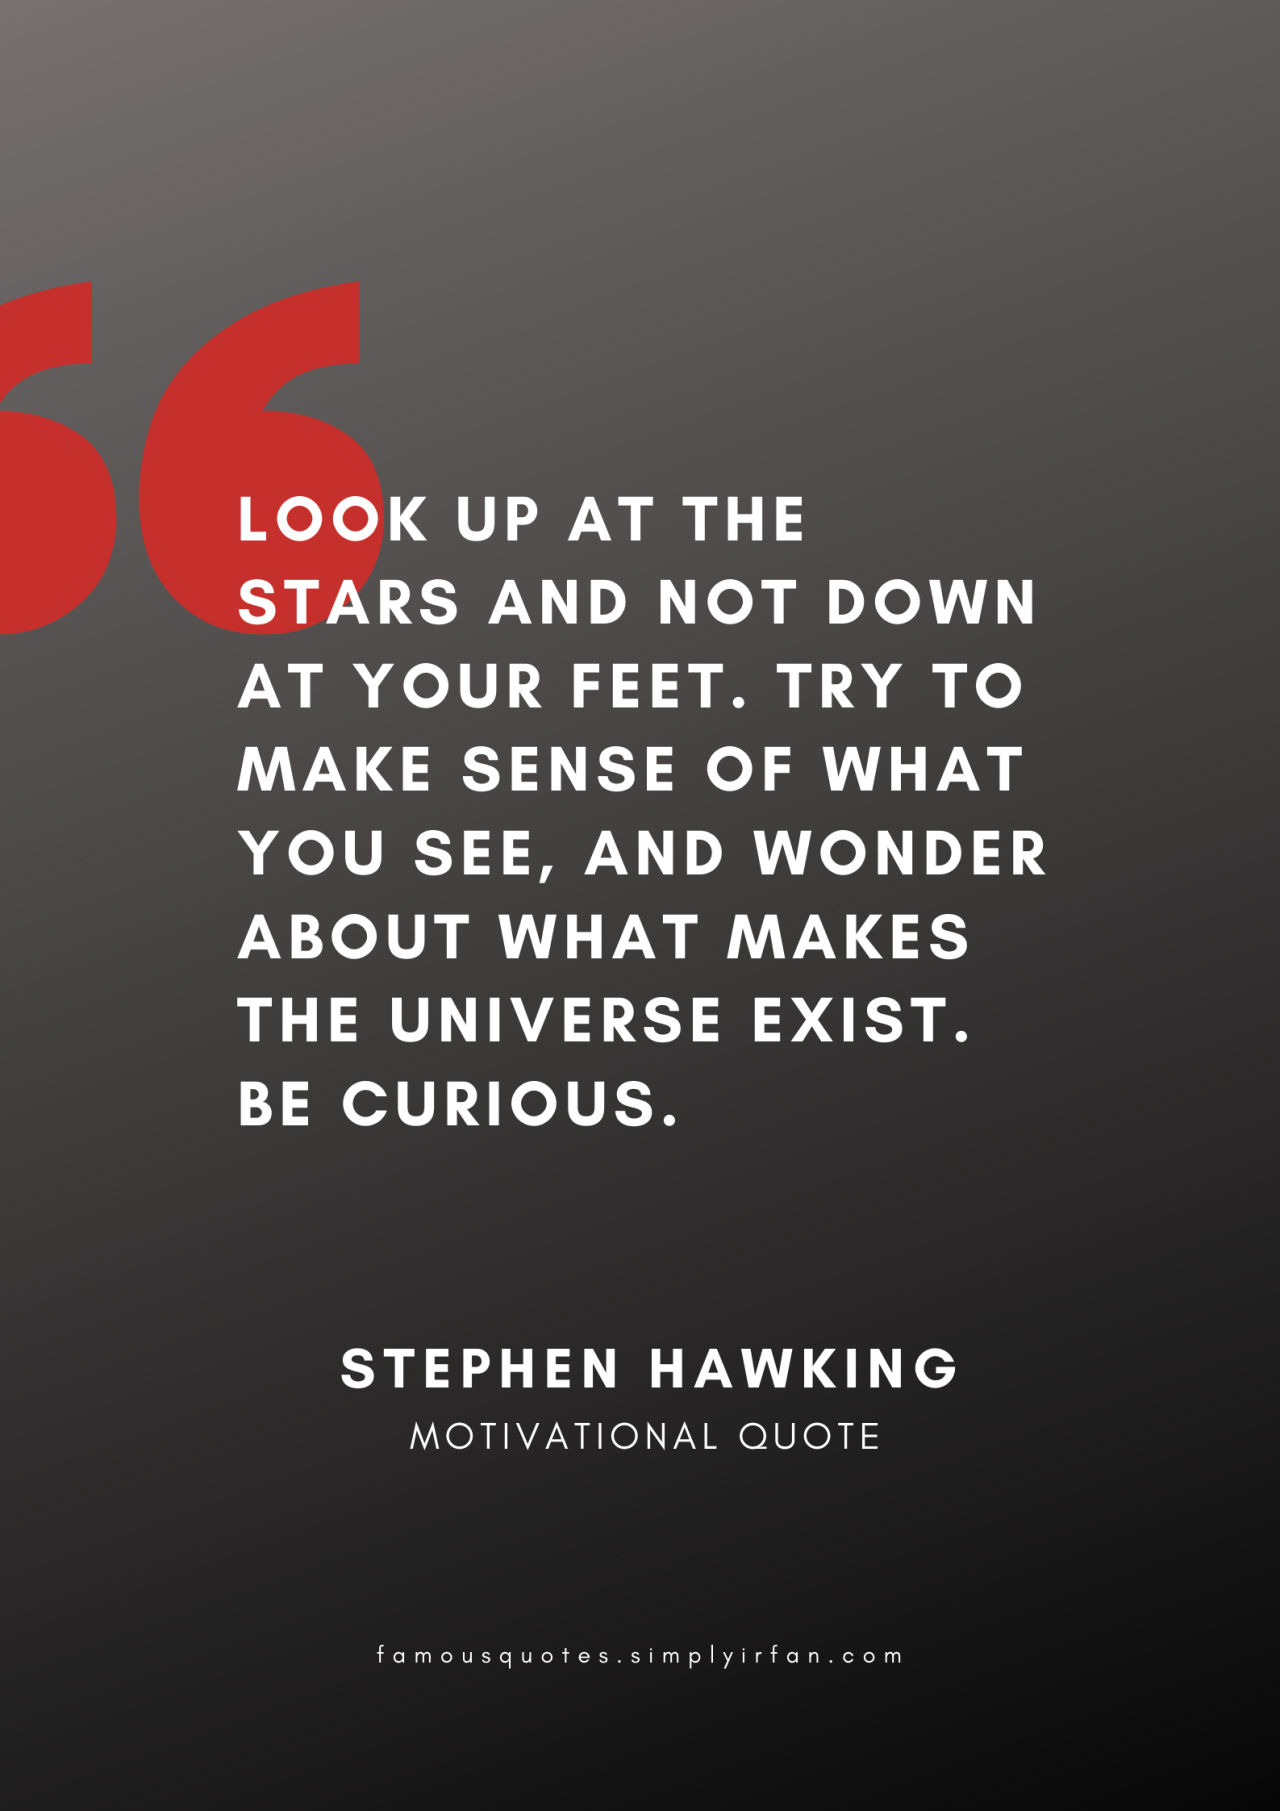 Look up at the stars and not down at your feet. Try to make sense of what you see, and wonder about what makes the universe exist. Be curious. Quote by Stephen Hawking